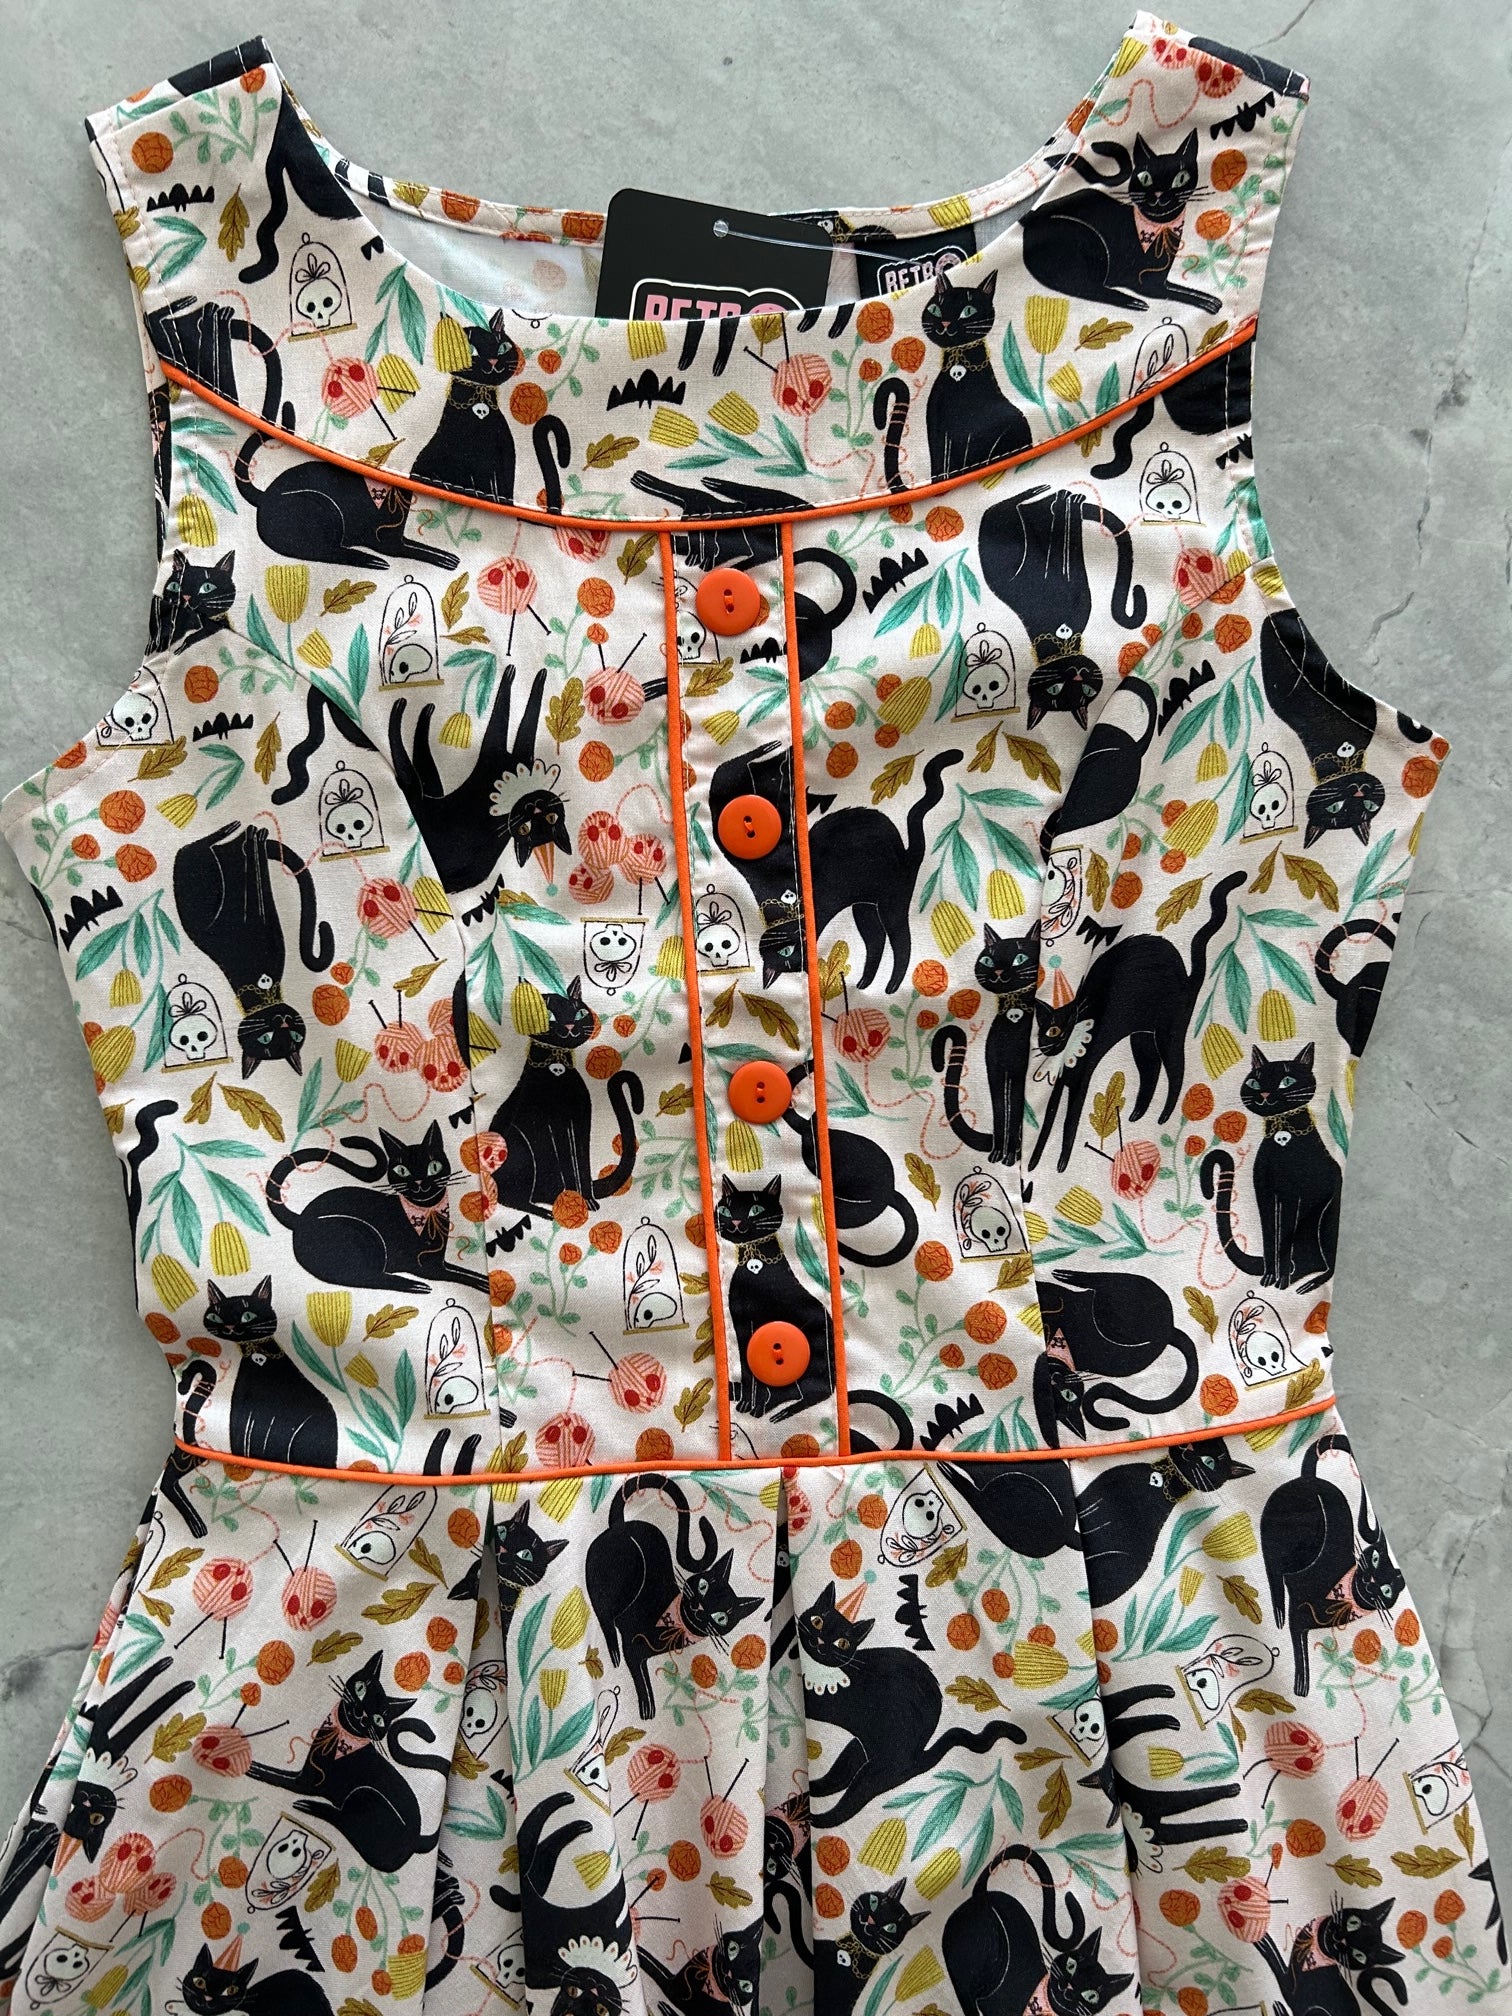 a close up of the bodice of Elizabeth dress in cats showing the orange buttons and piping detail